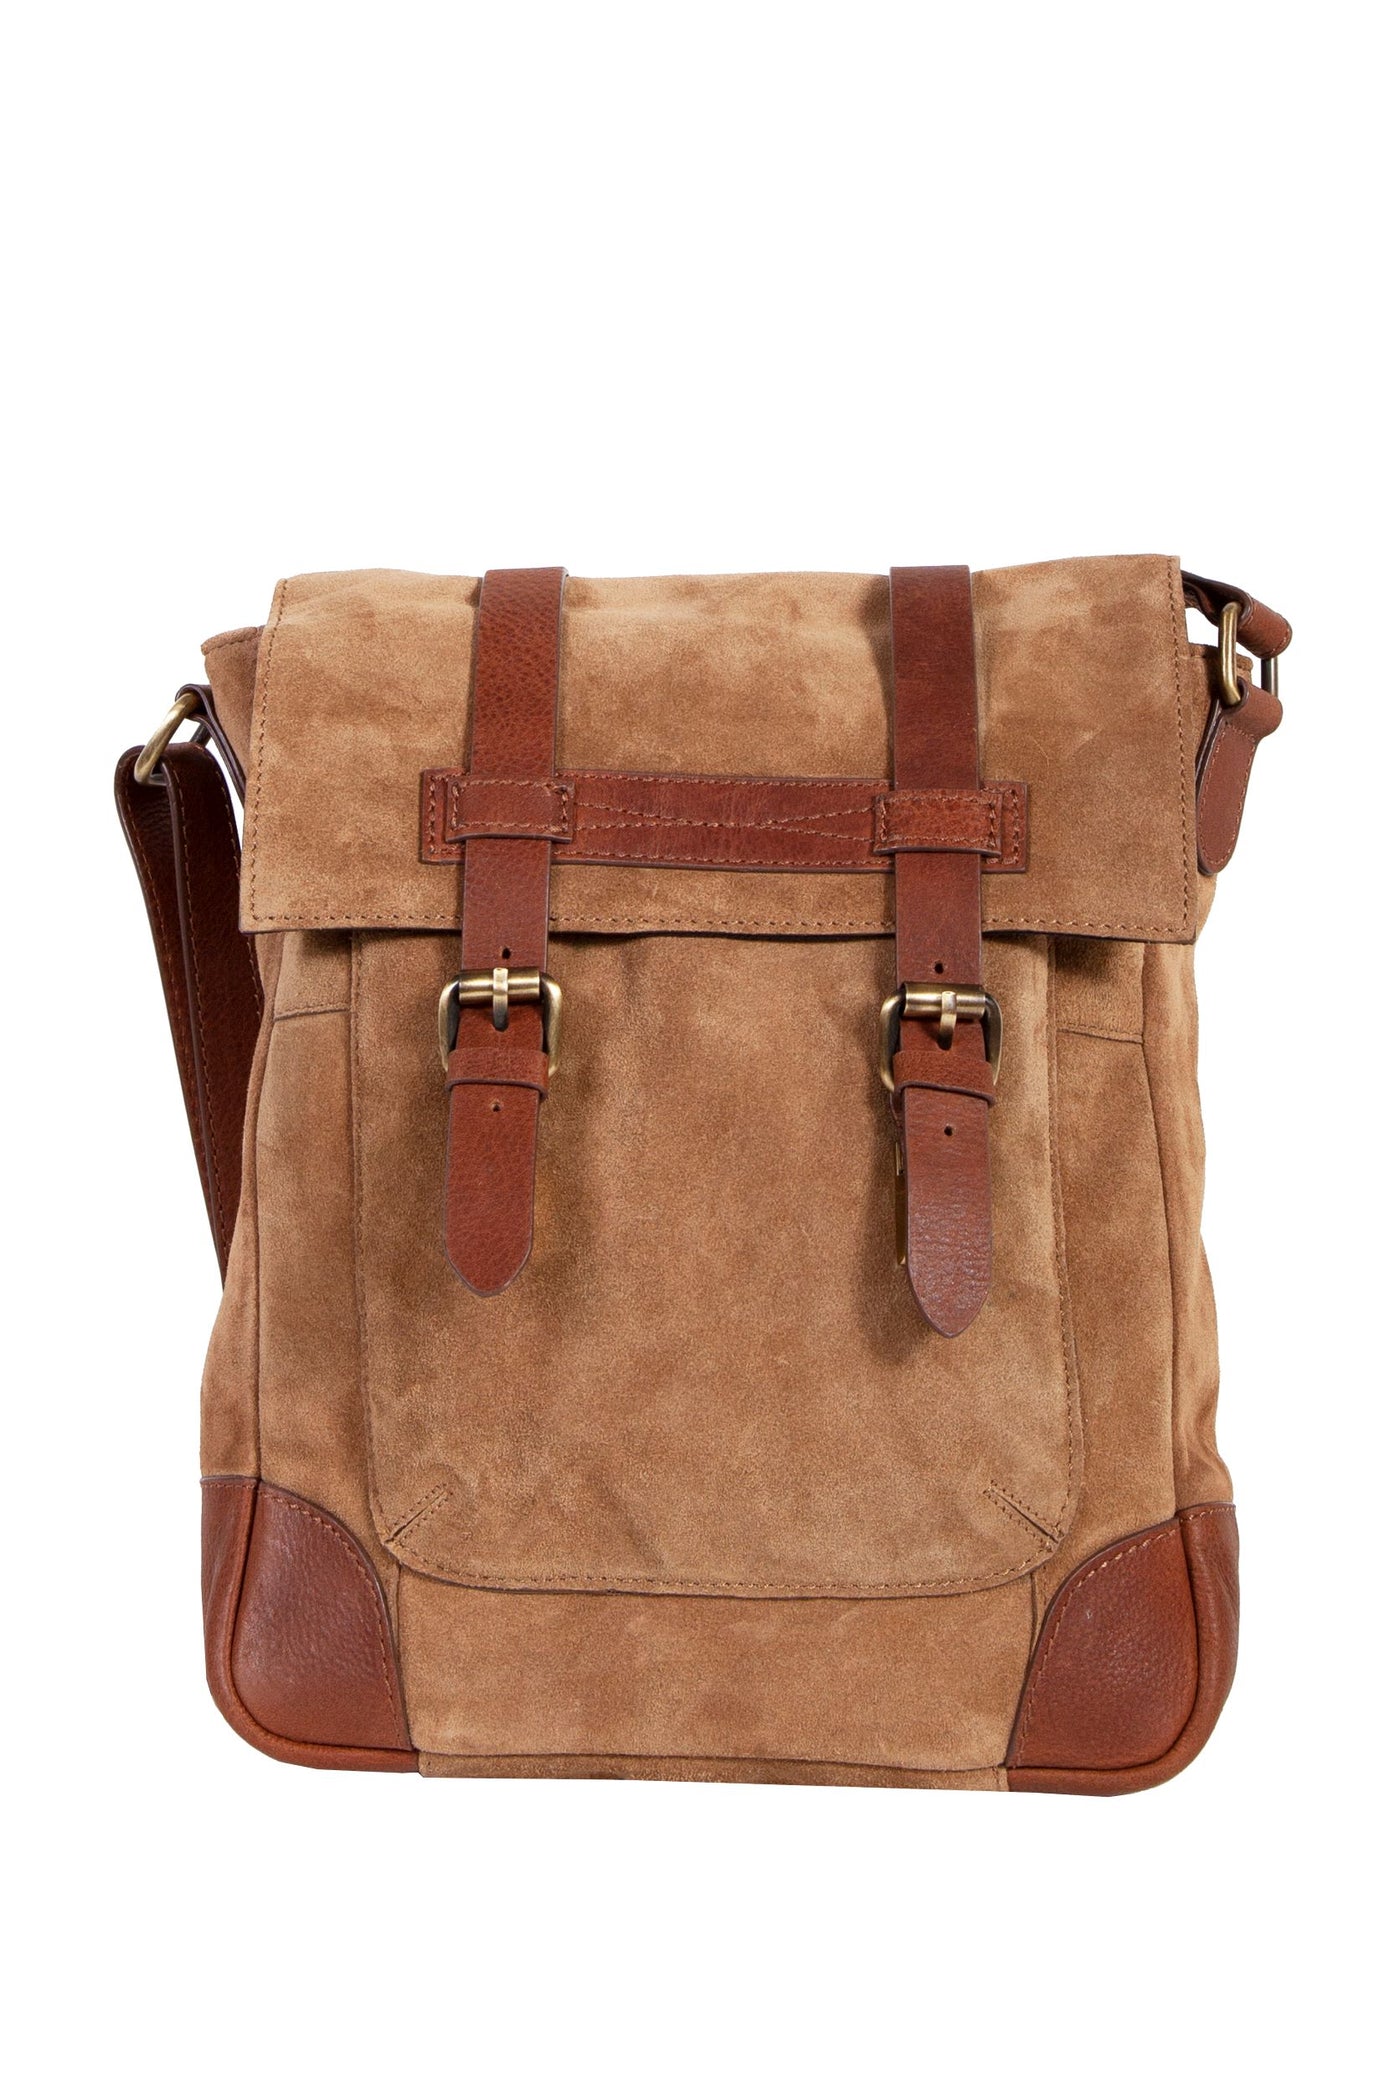 Scully Leather Messenger Bag